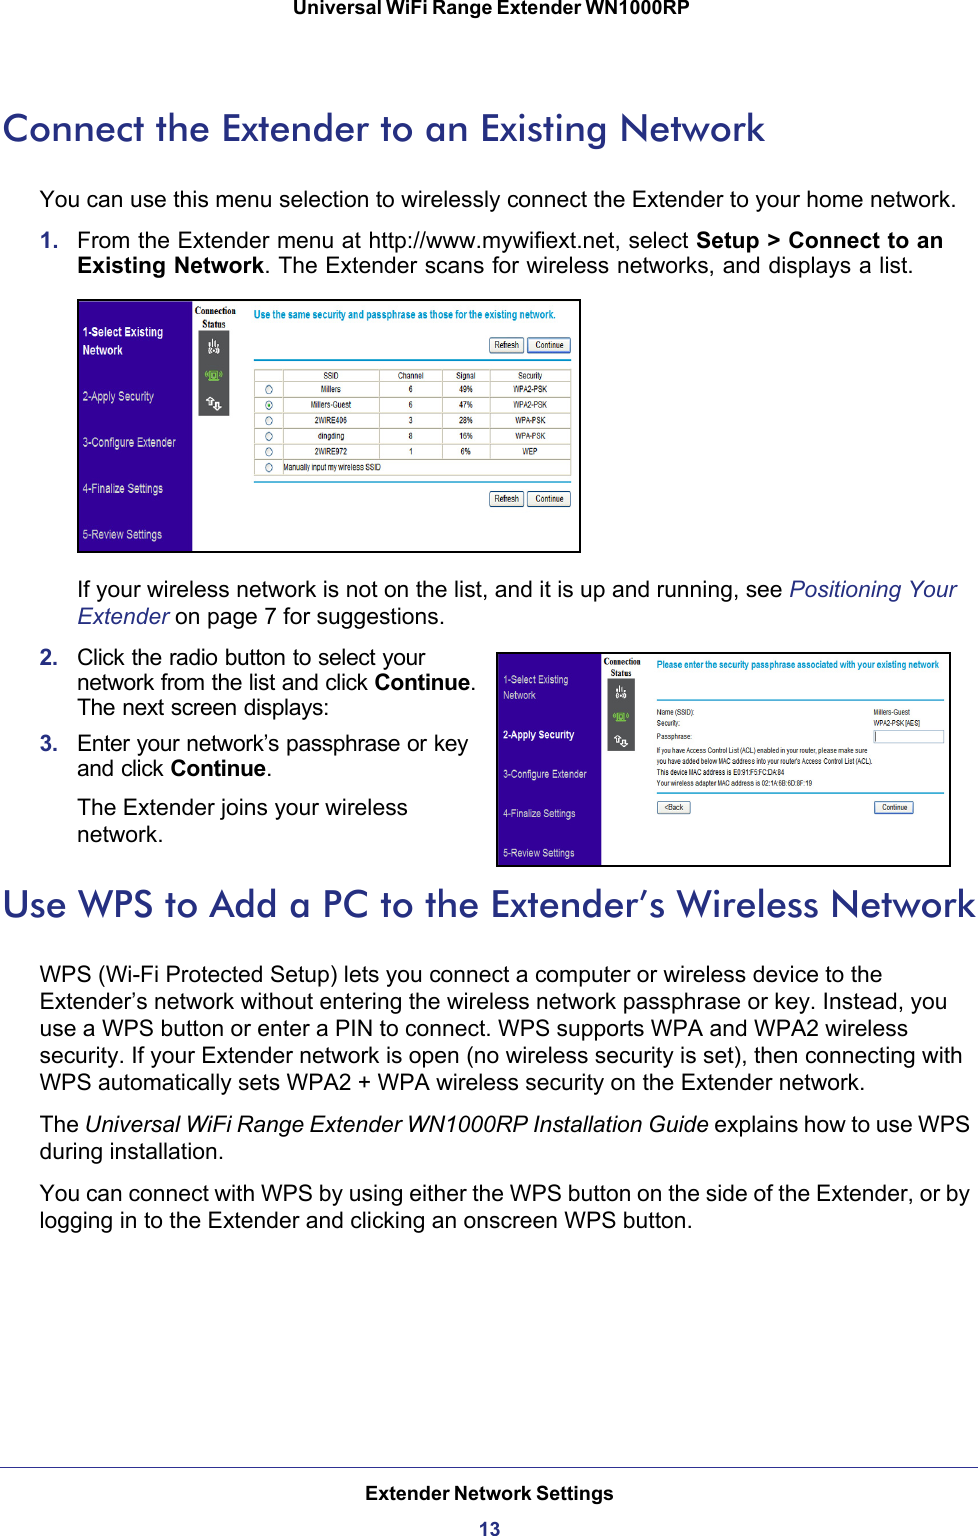 Extender Network Settings13 Universal WiFi Range Extender WN1000RPConnect the Extender to an Existing NetworkYou can use this menu selection to wirelessly connect the Extender to your home network.1.  From the Extender menu at http://www.mywifiext.net, select Setup &gt; Connect to an Existing Network. The Extender scans for wireless networks, and displays a list.If your wireless network is not on the list, and it is up and running, see Positioning Your Extender on page  7 for suggestions.2.  Click the radio button to select your network from the list and click Continue. The next screen displays:3.  Enter your network’s passphrase or key and click Continue. The Extender joins your wireless network.Use WPS to Add a PC to the Extender’s Wireless NetworkWPS (Wi-Fi Protected Setup) lets you connect a computer or wireless device to the Extender’s network without entering the wireless network passphrase or key. Instead, you use a WPS button or enter a PIN to connect. WPS supports WPA and WPA2 wireless security. If your Extender network is open (no wireless security is set), then connecting with WPS automatically sets WPA2 + WPA wireless security on the Extender network.The Universal WiFi Range Extender WN1000RP Installation Guide explains how to use WPS during installation.You can connect with WPS by using either the WPS button on the side of the Extender, or by logging in to the Extender and clicking an onscreen WPS button.